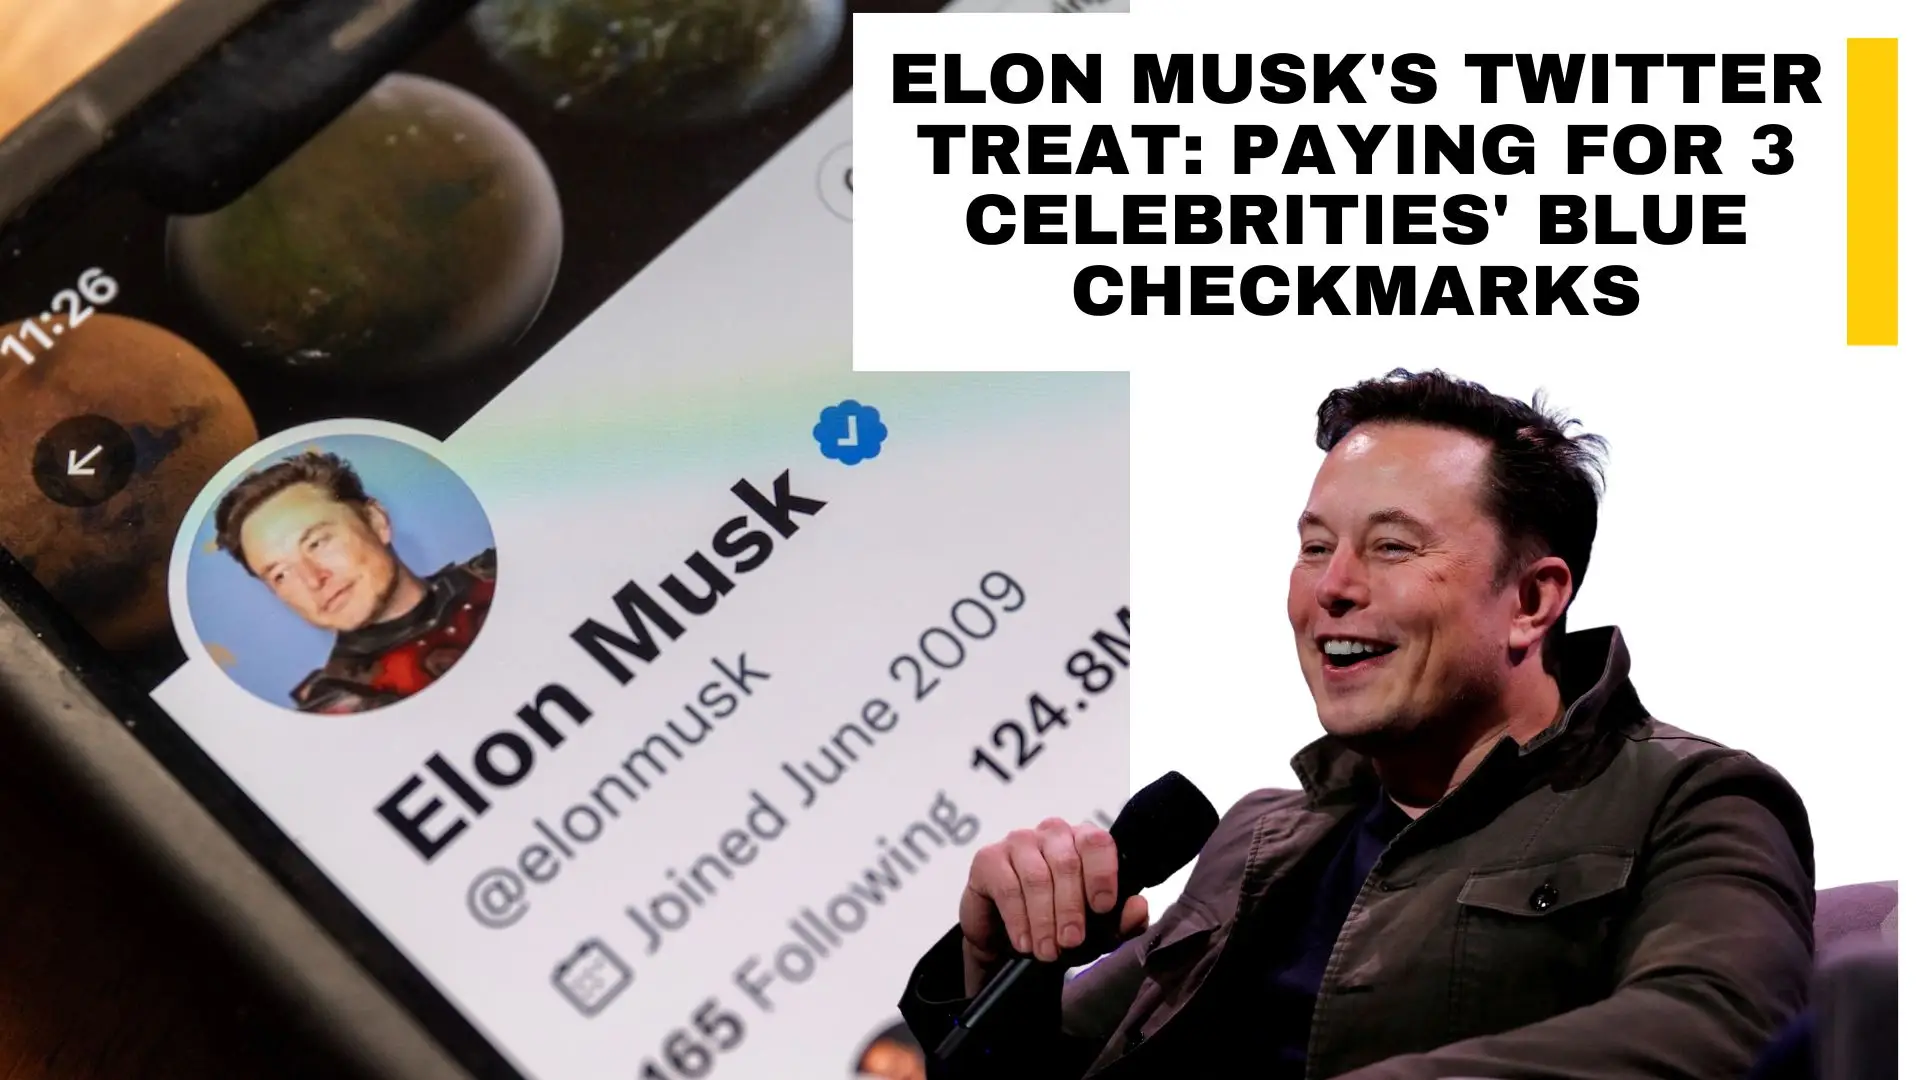 Elon Musk's Twitter Treat Paying for 3 Celebrities' Blue Checkmarks